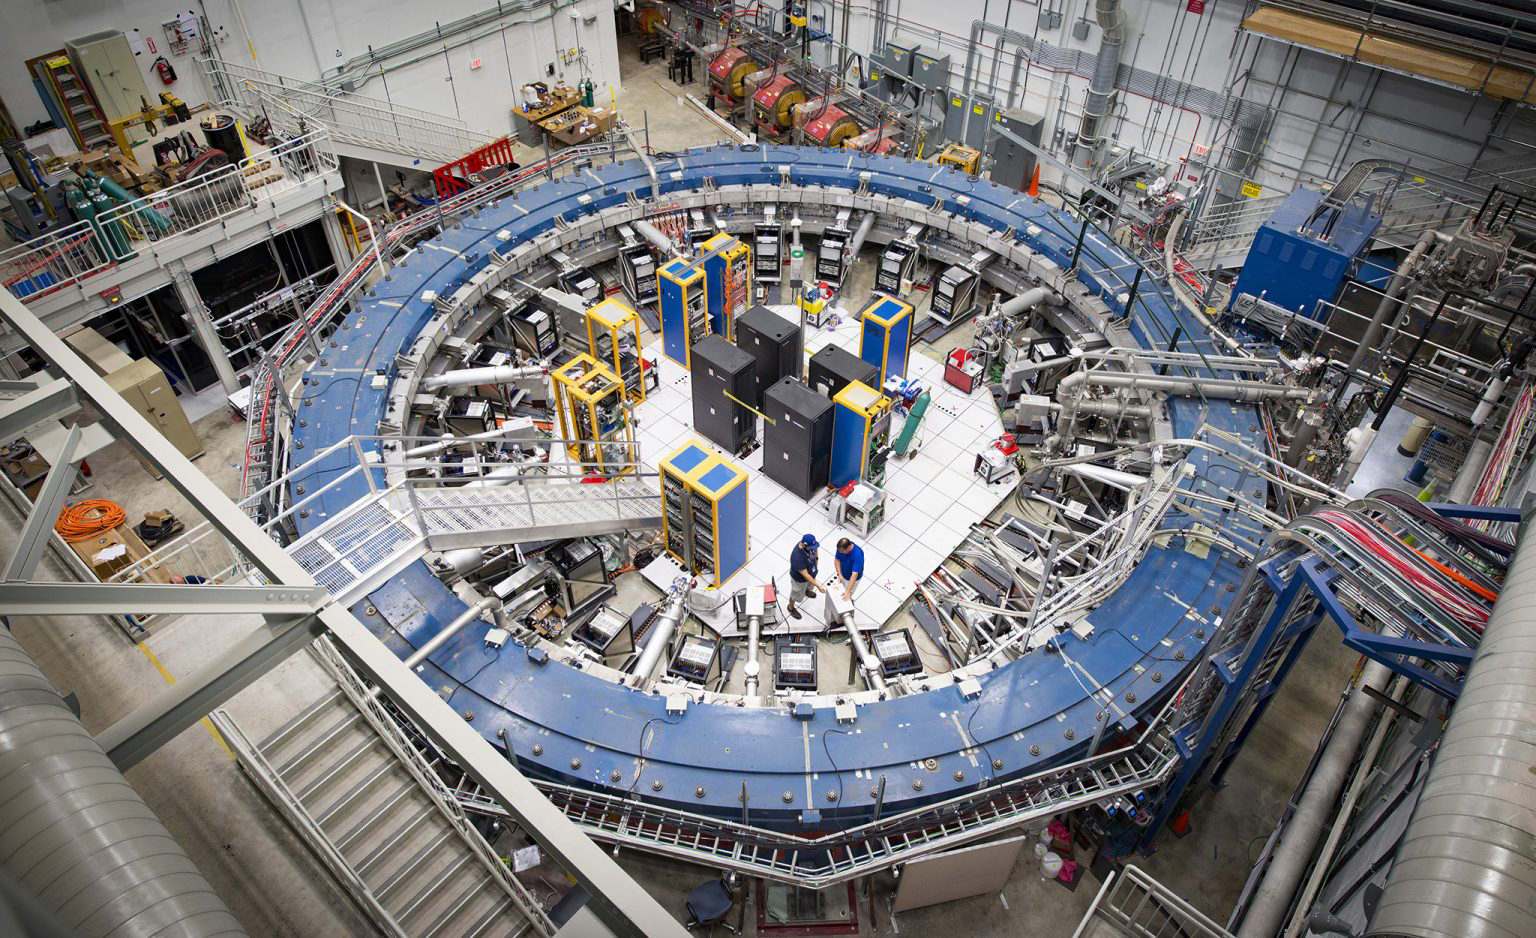 The core component of the Muon g-2 experiment at the Fermi National Accelerator Laboratory is a 50-foot superconducting electromagnet. UM physicist Breese Quinn is among the collaborators on the project that has made the most precise measurement ever of the movement of subatomic particles called muons. The magnet traveled through northeast Mississippi in 2013 on a 3,200-mile journey from New York to the underground laboratory in the suburbs of Chicago. Photo courtesy Fermilab